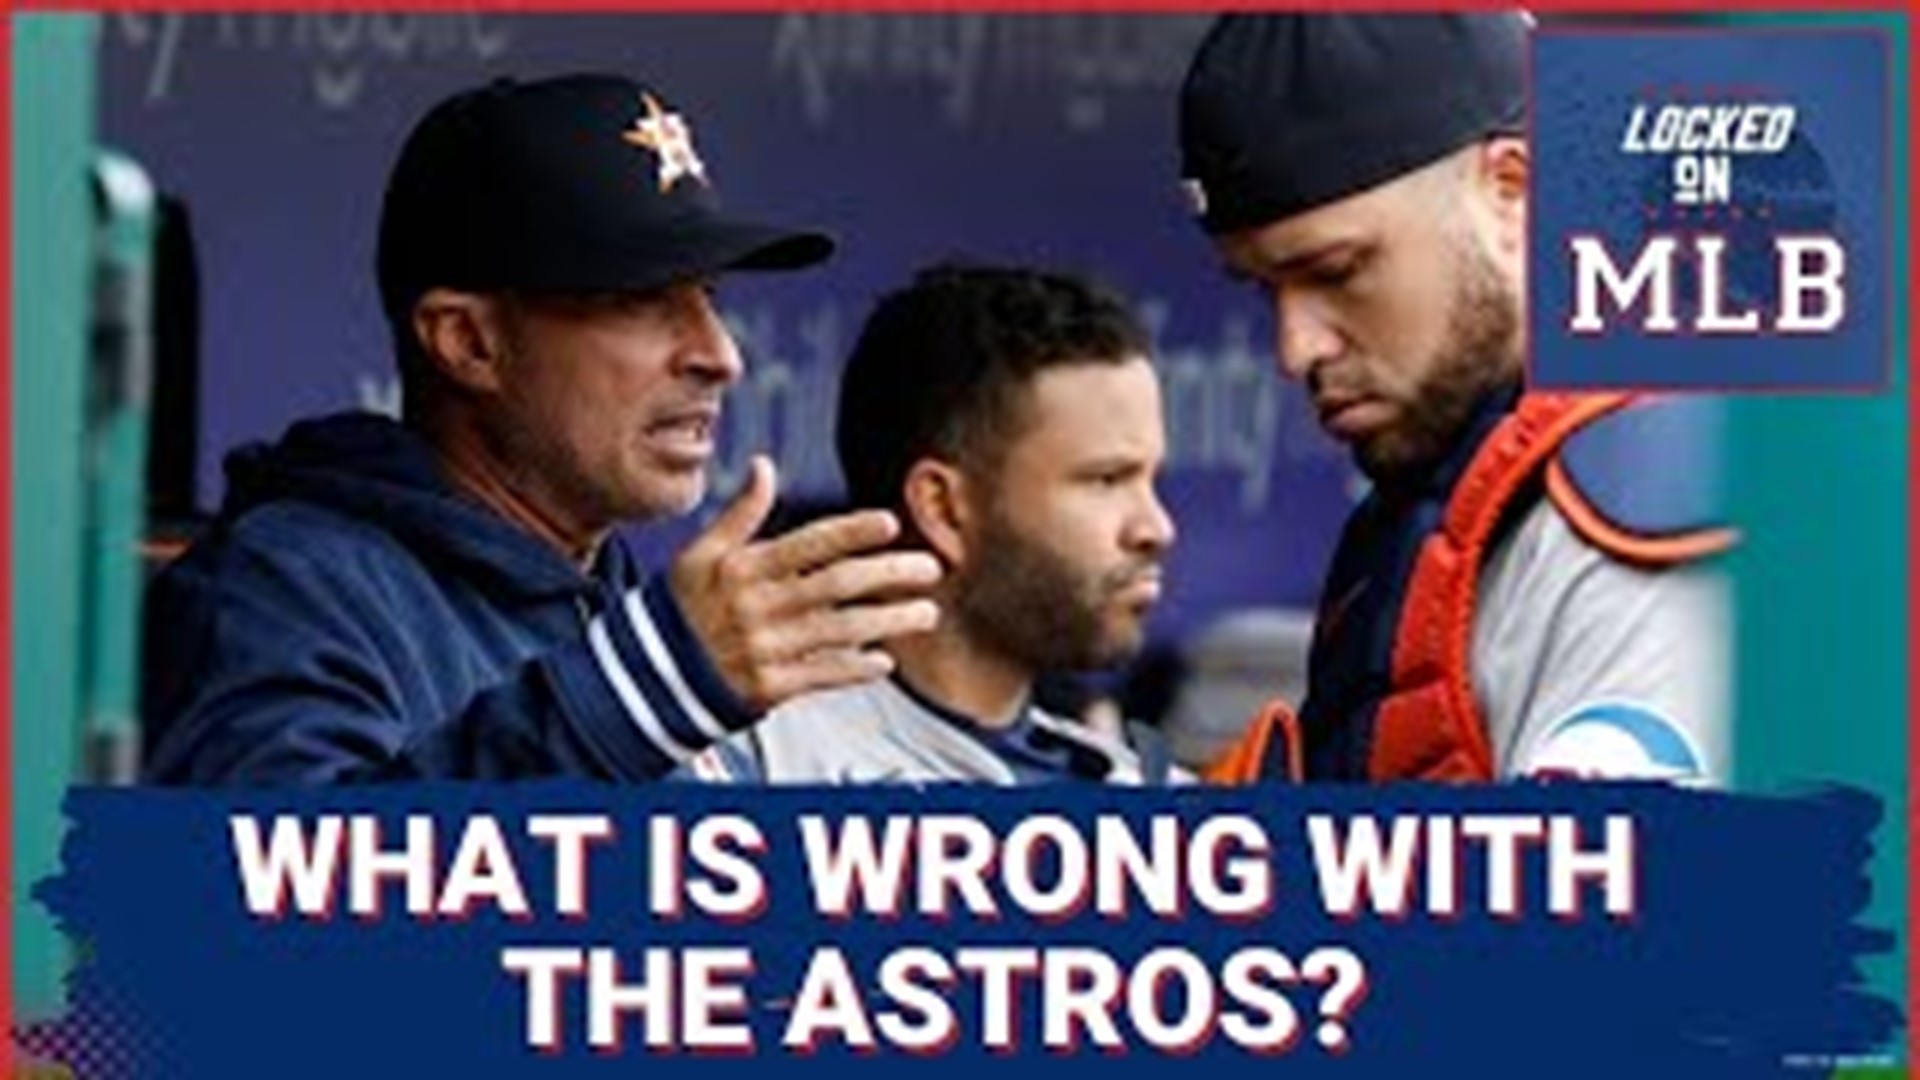 The Astros are off to a surprisingly poor and uninspired start. Meanwhile, the Mets won their series with the Dodgers and are looking better and better.